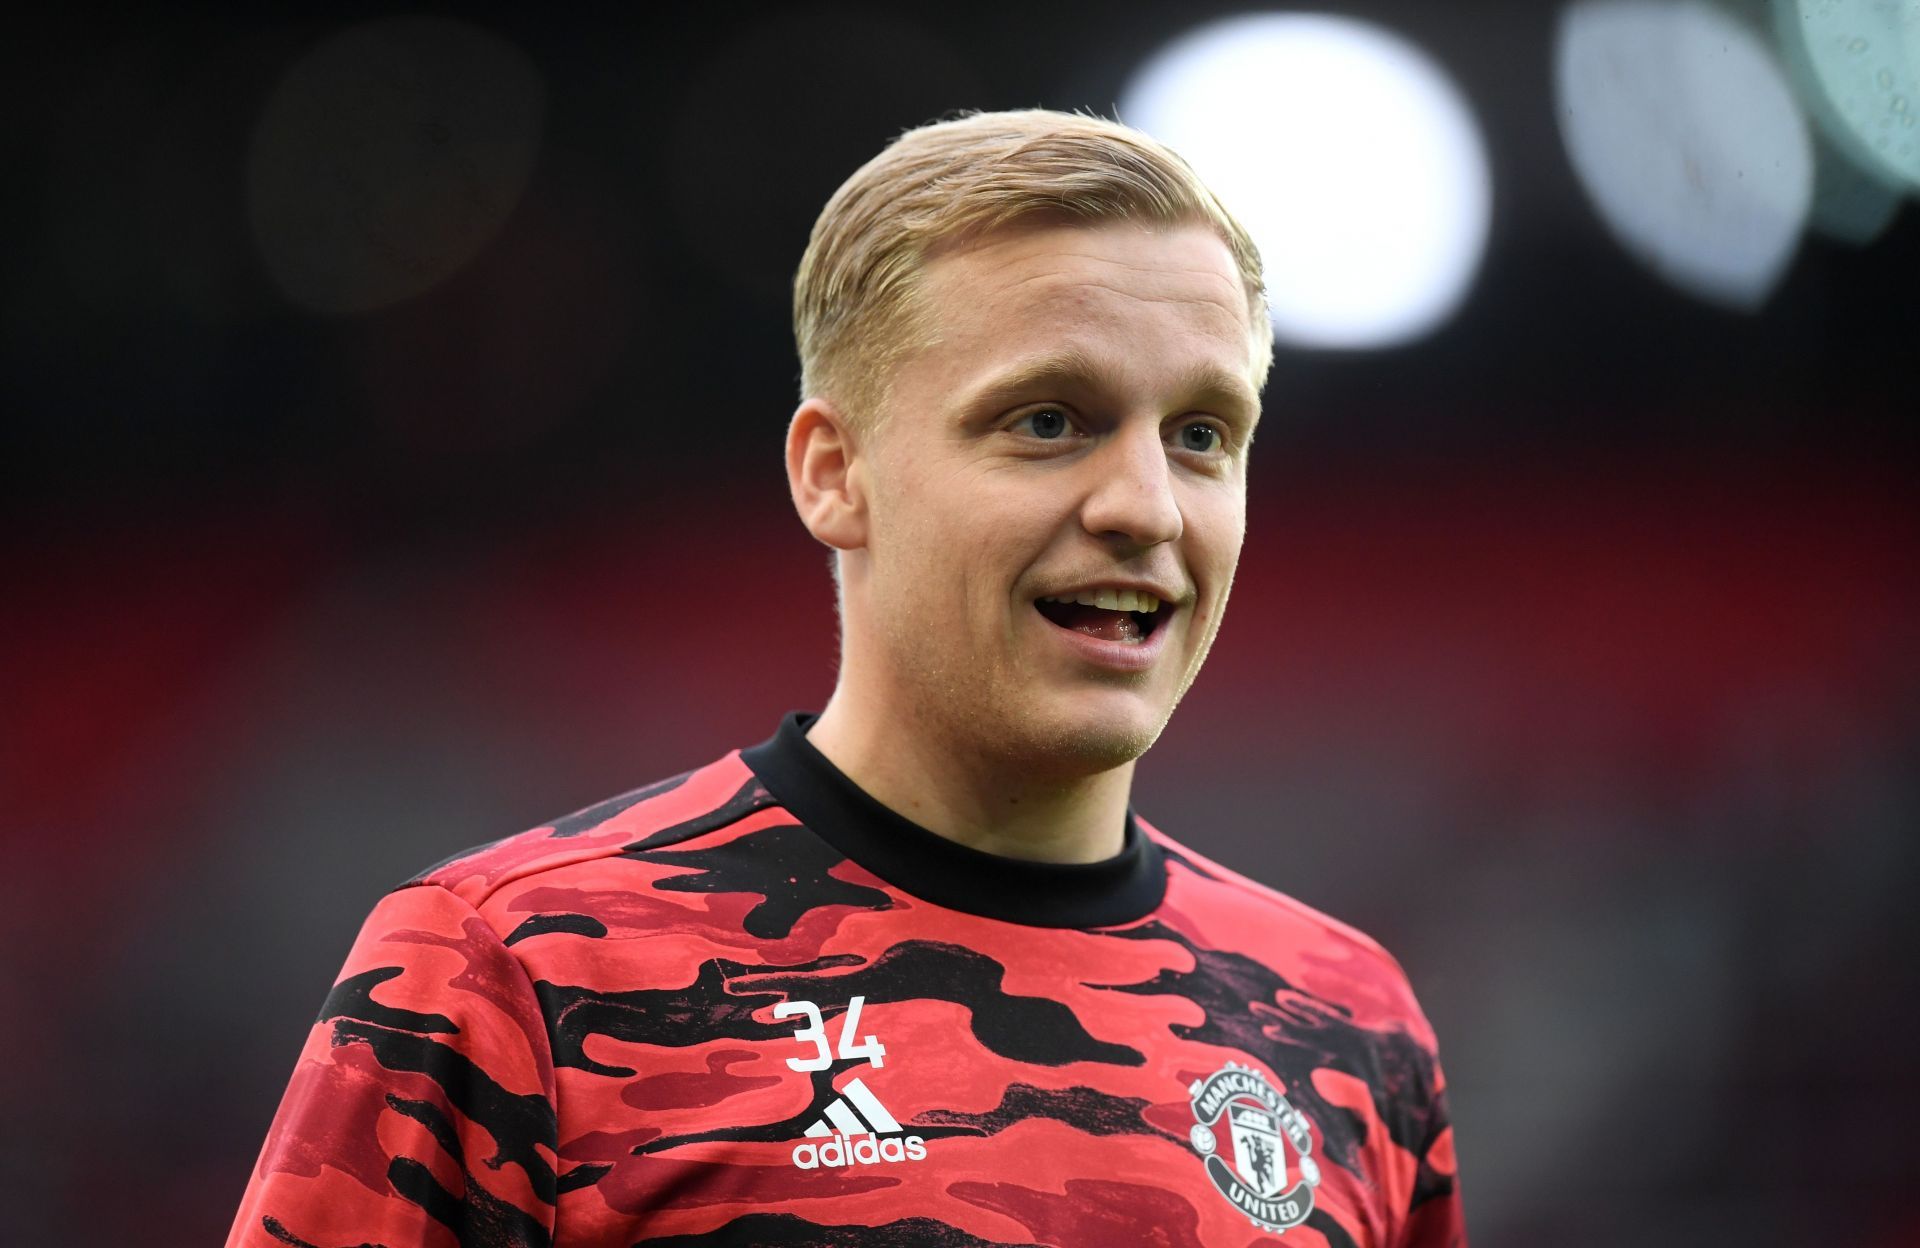 Juventus are planning to move for Donny van de Beek in January